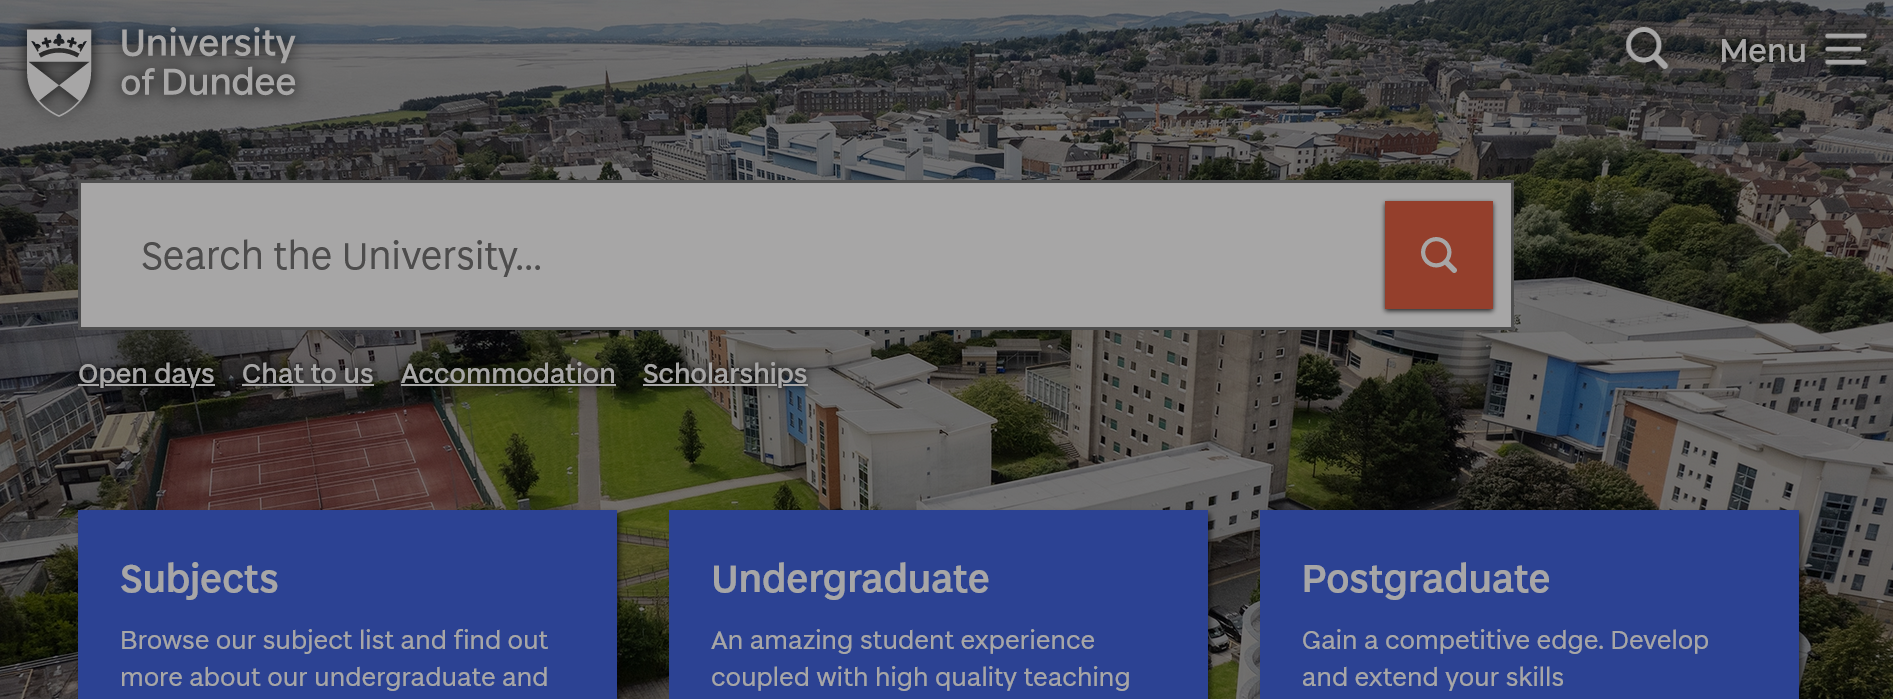 Africa Community Scholarship for International Students at University of Dundee in UK